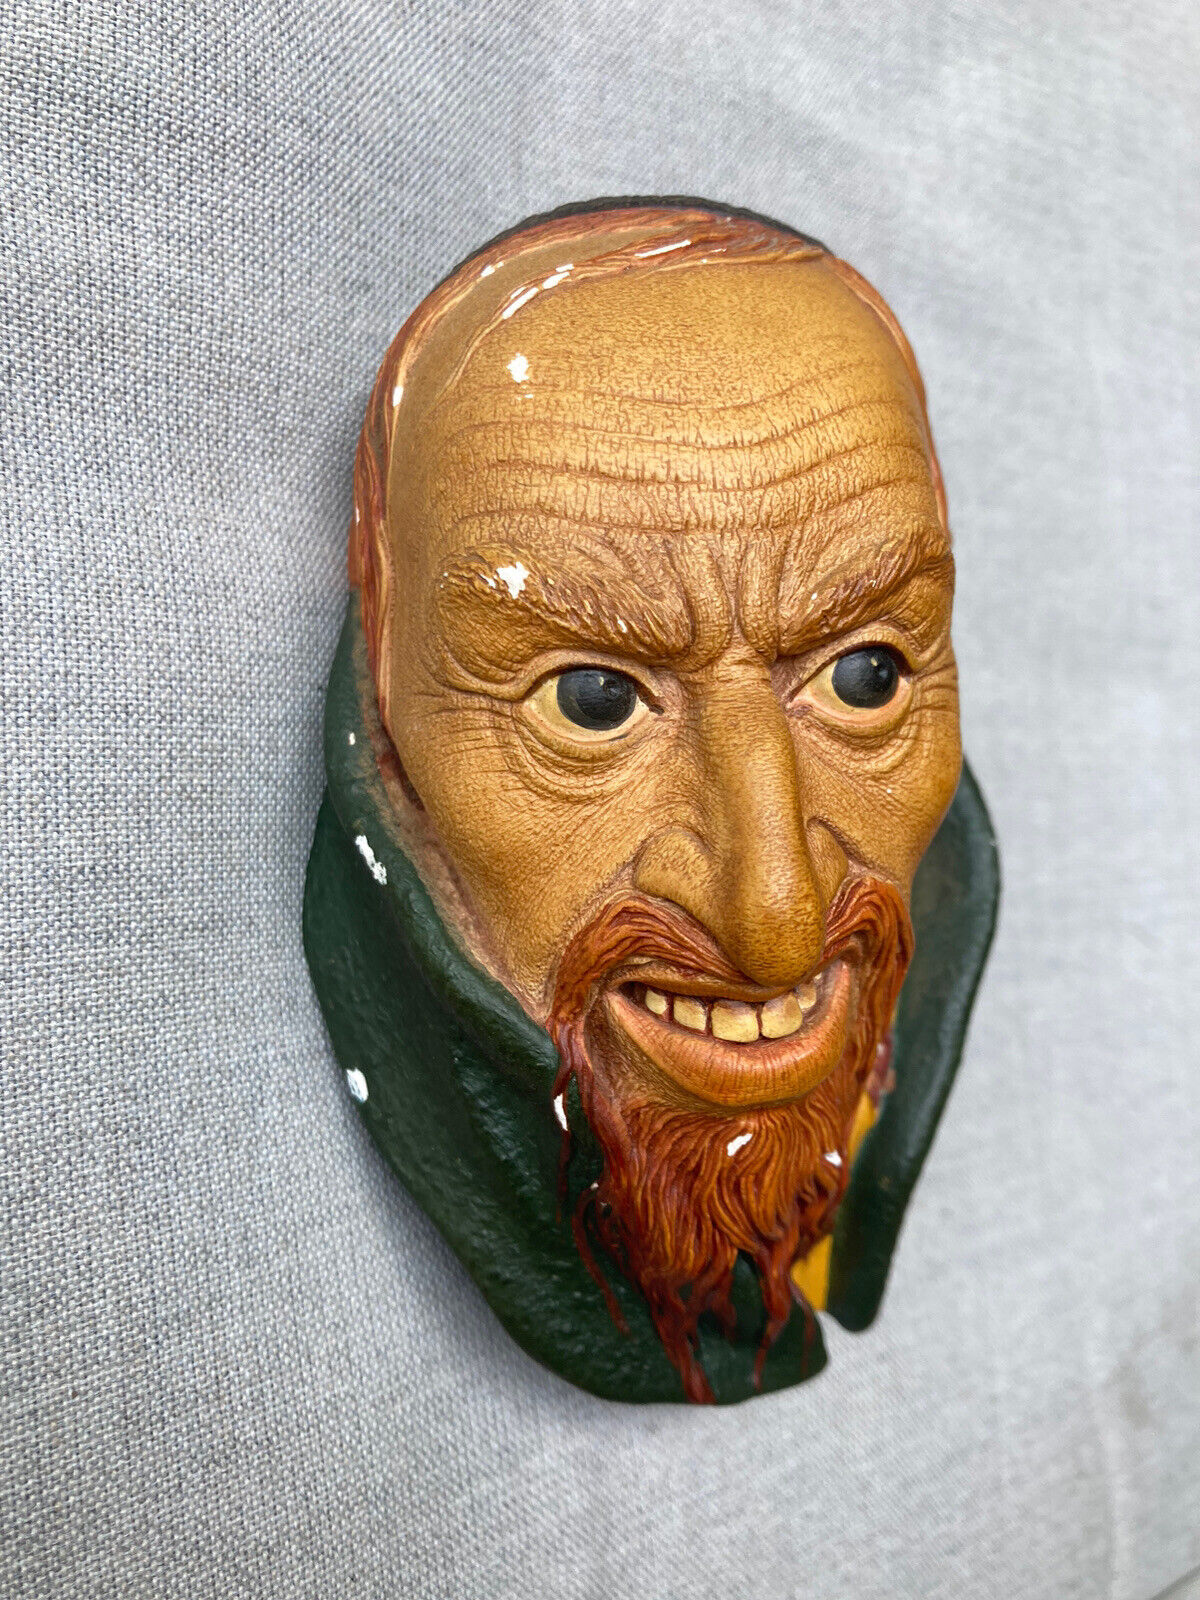 VINTAGE 1964 BOSSONS FAGIN CHALKWARE HEAD - MADE IN ENGLAND.